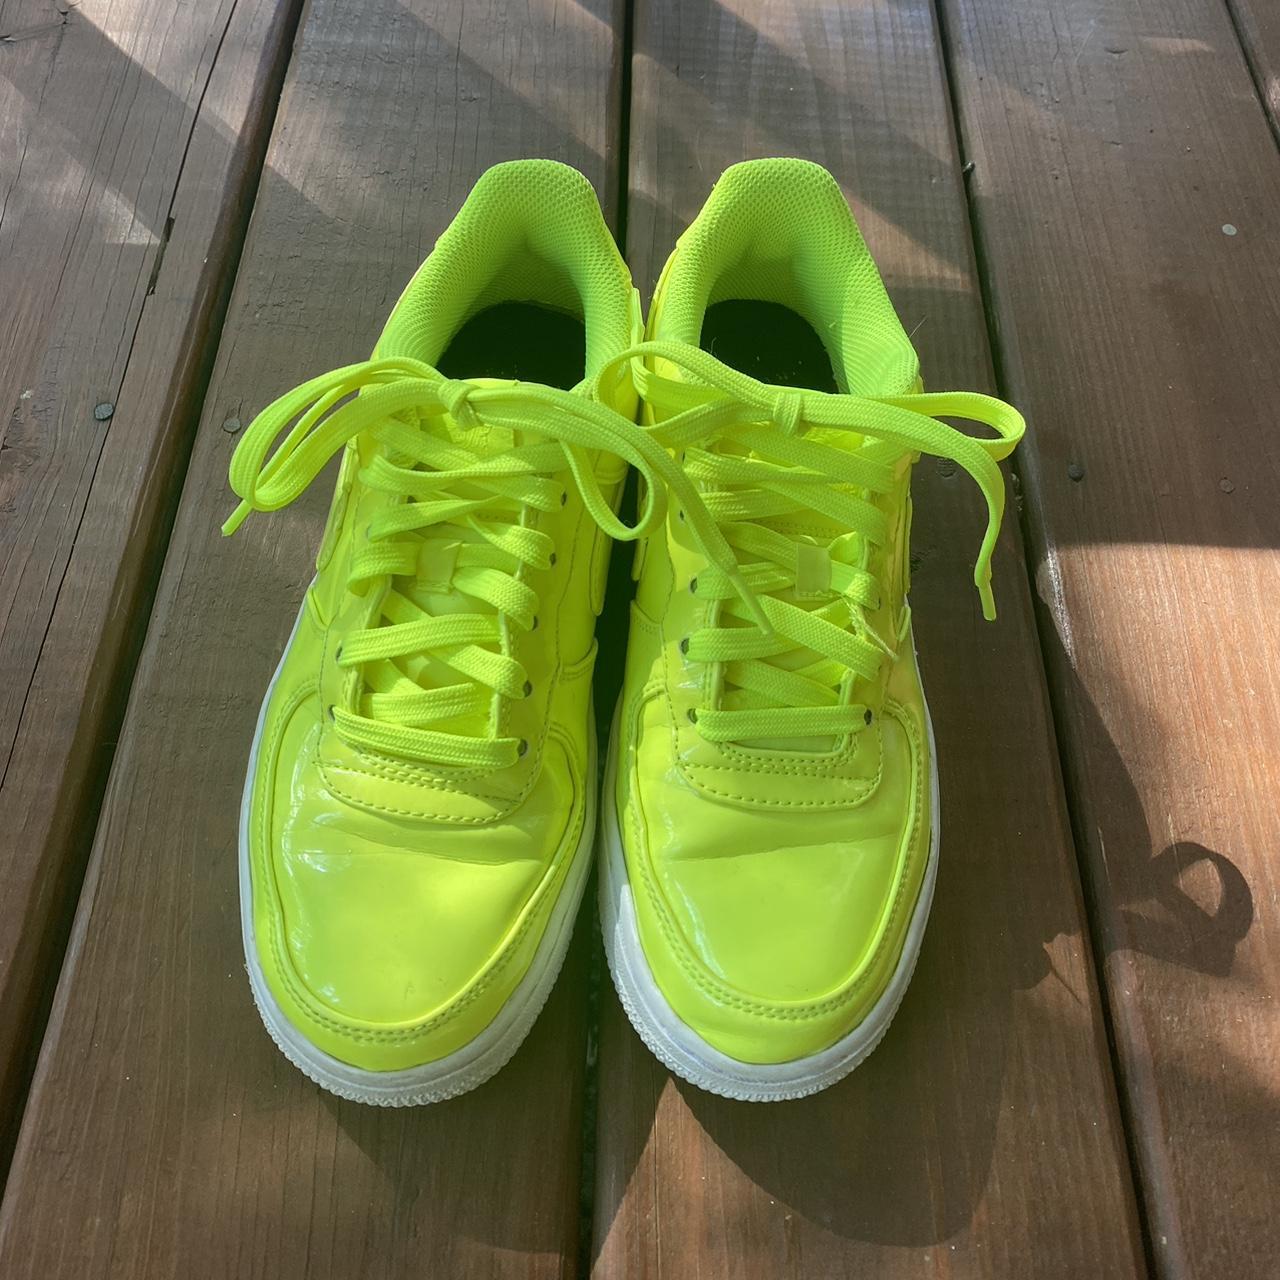 Neon yellow/green UV reactive air force 1s! they're - Depop